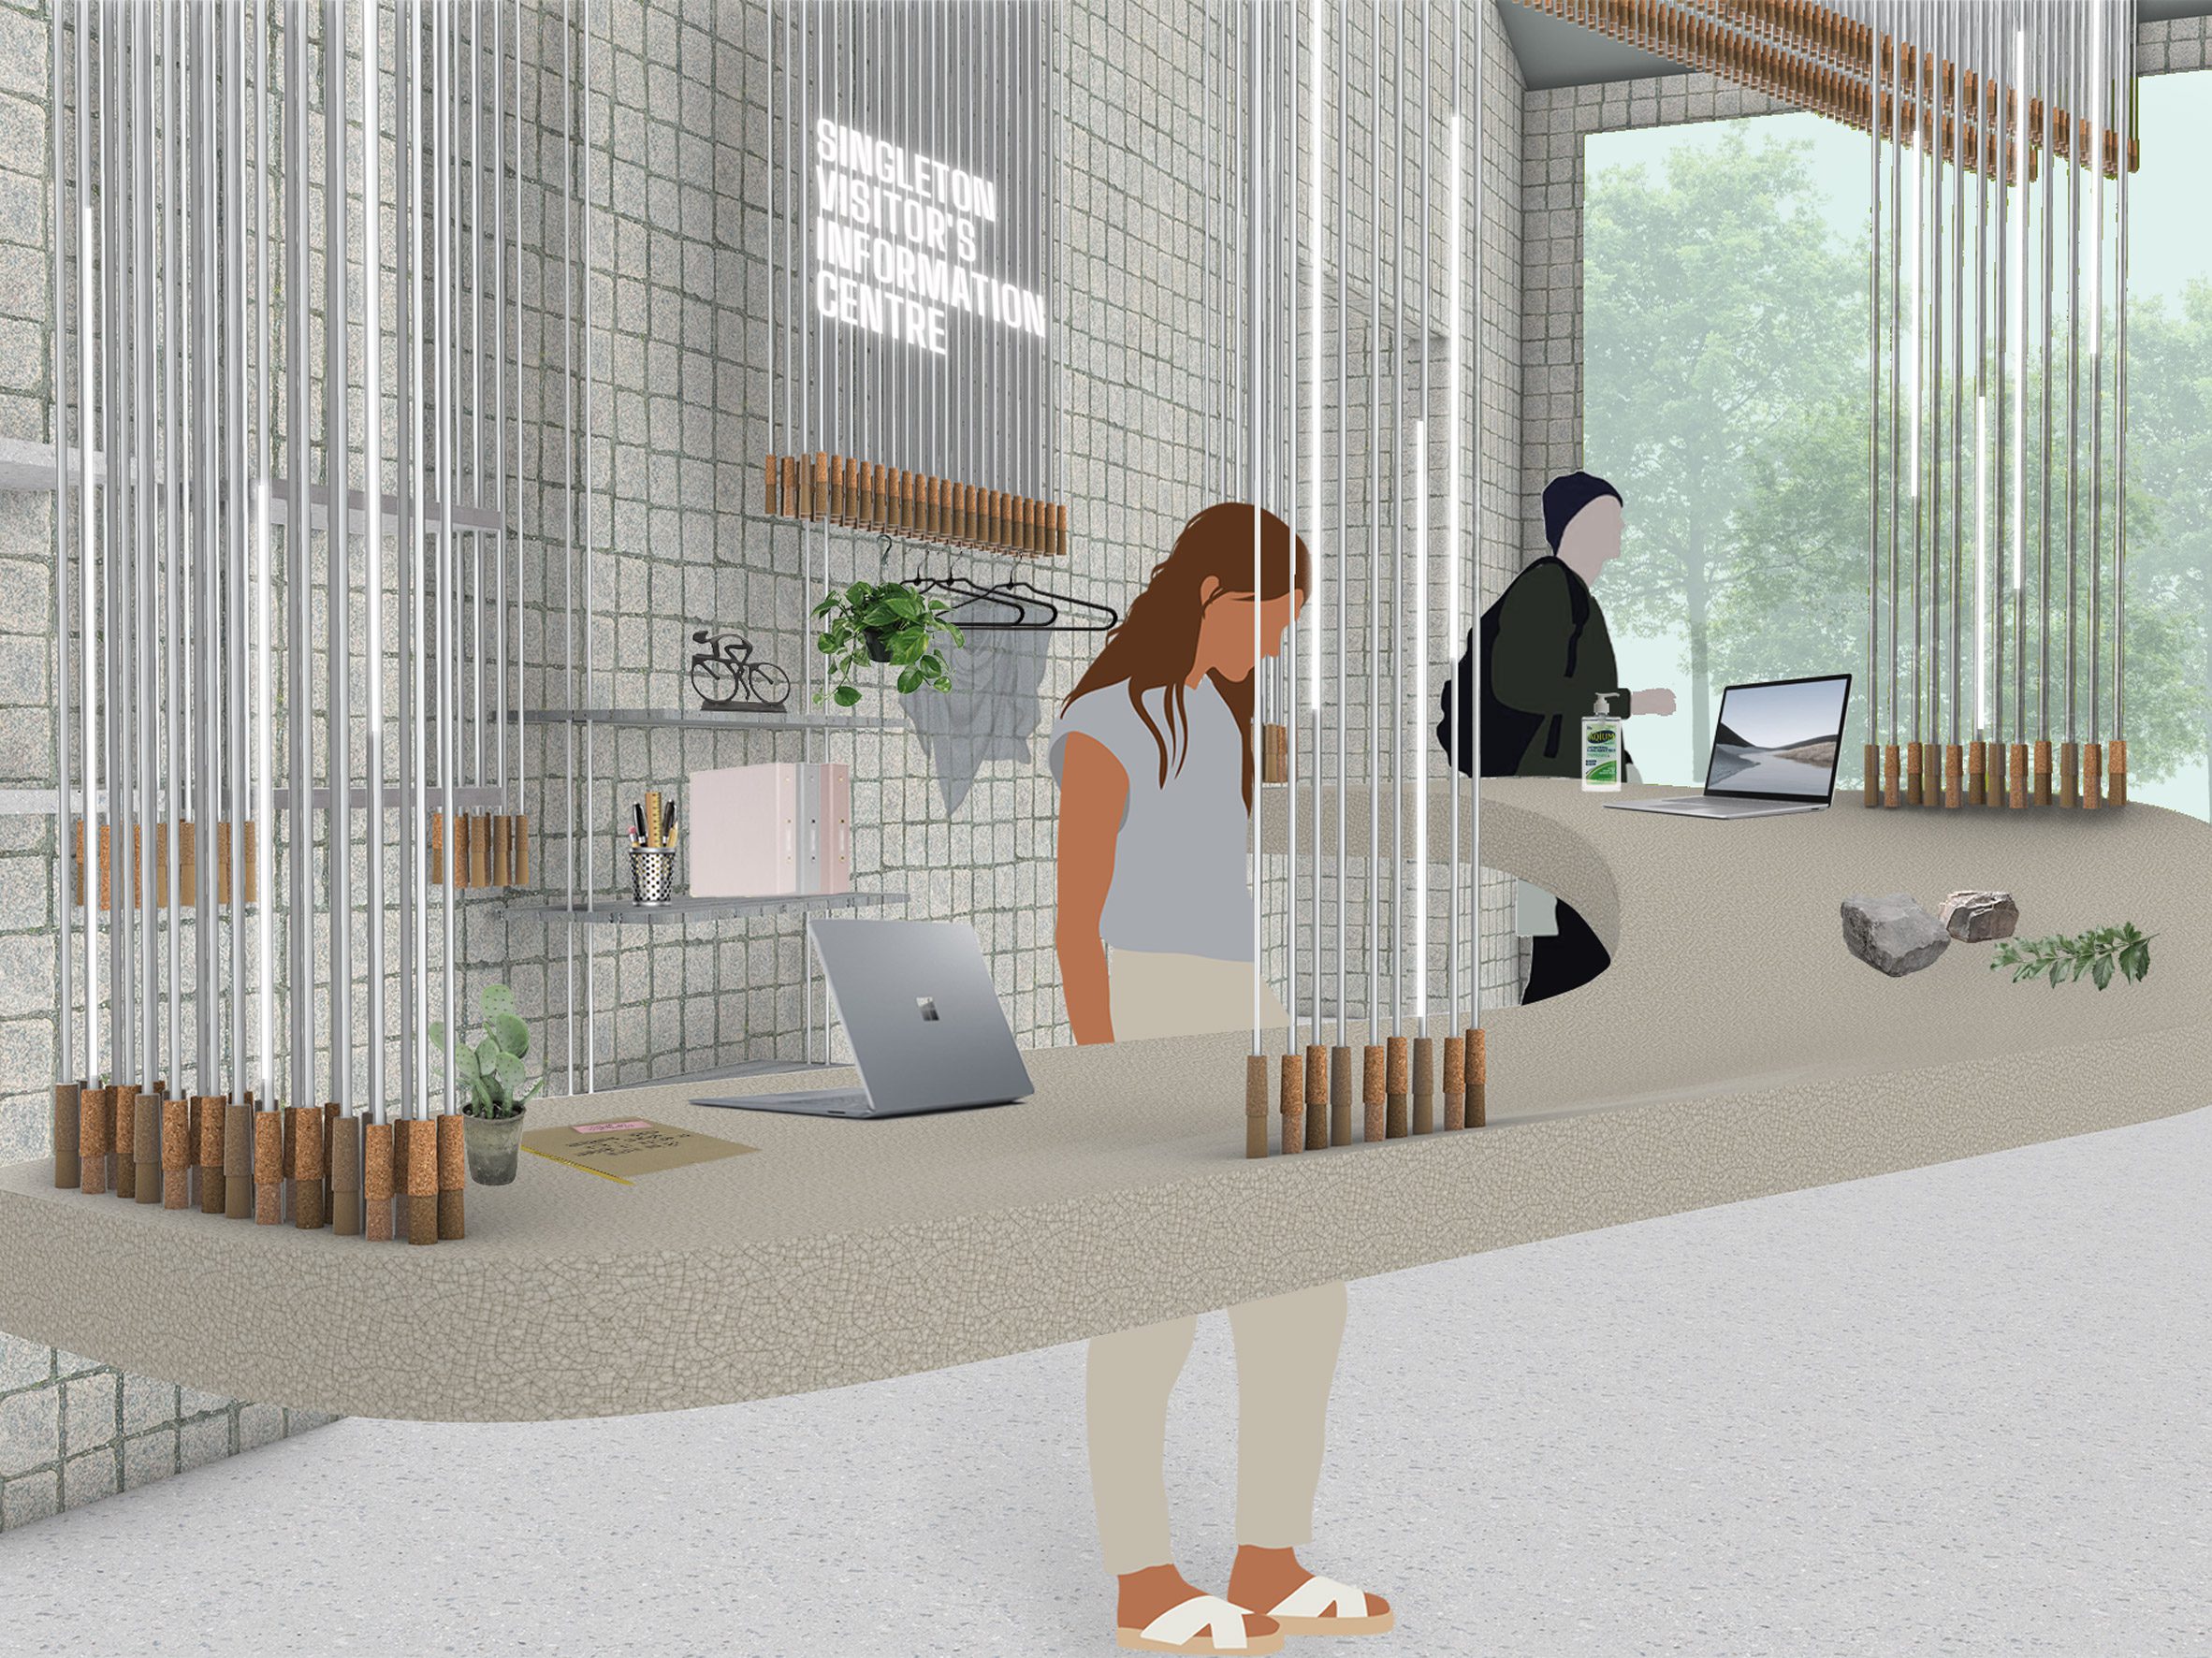 Visualisation of the interior of an information centre in Singleton